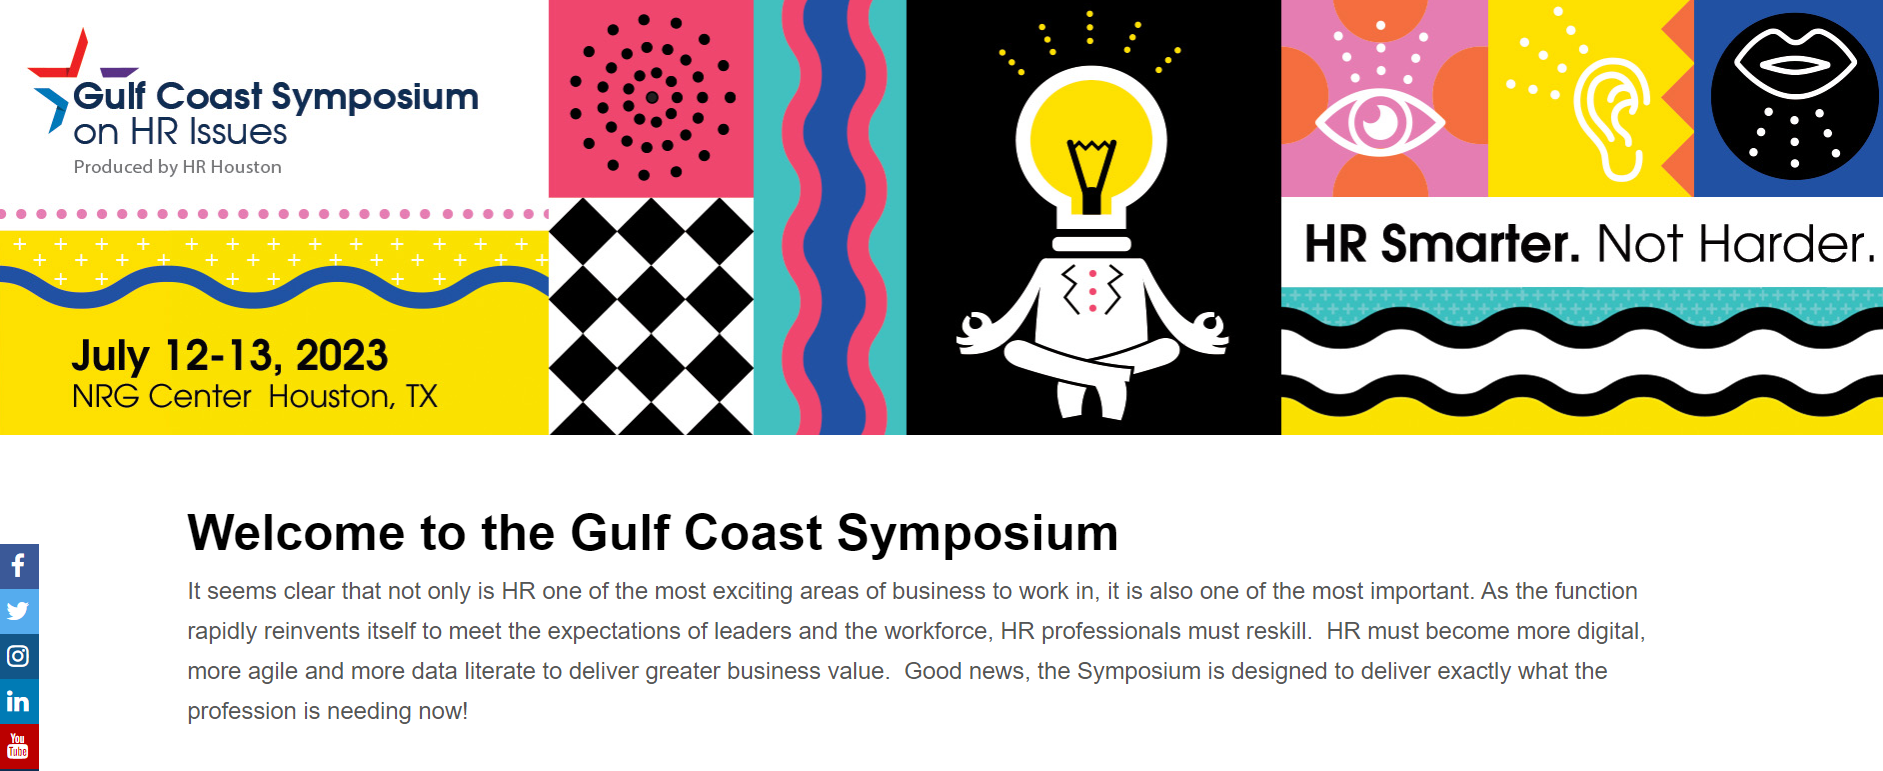 Gulf Coast Symposium event information for HR conference